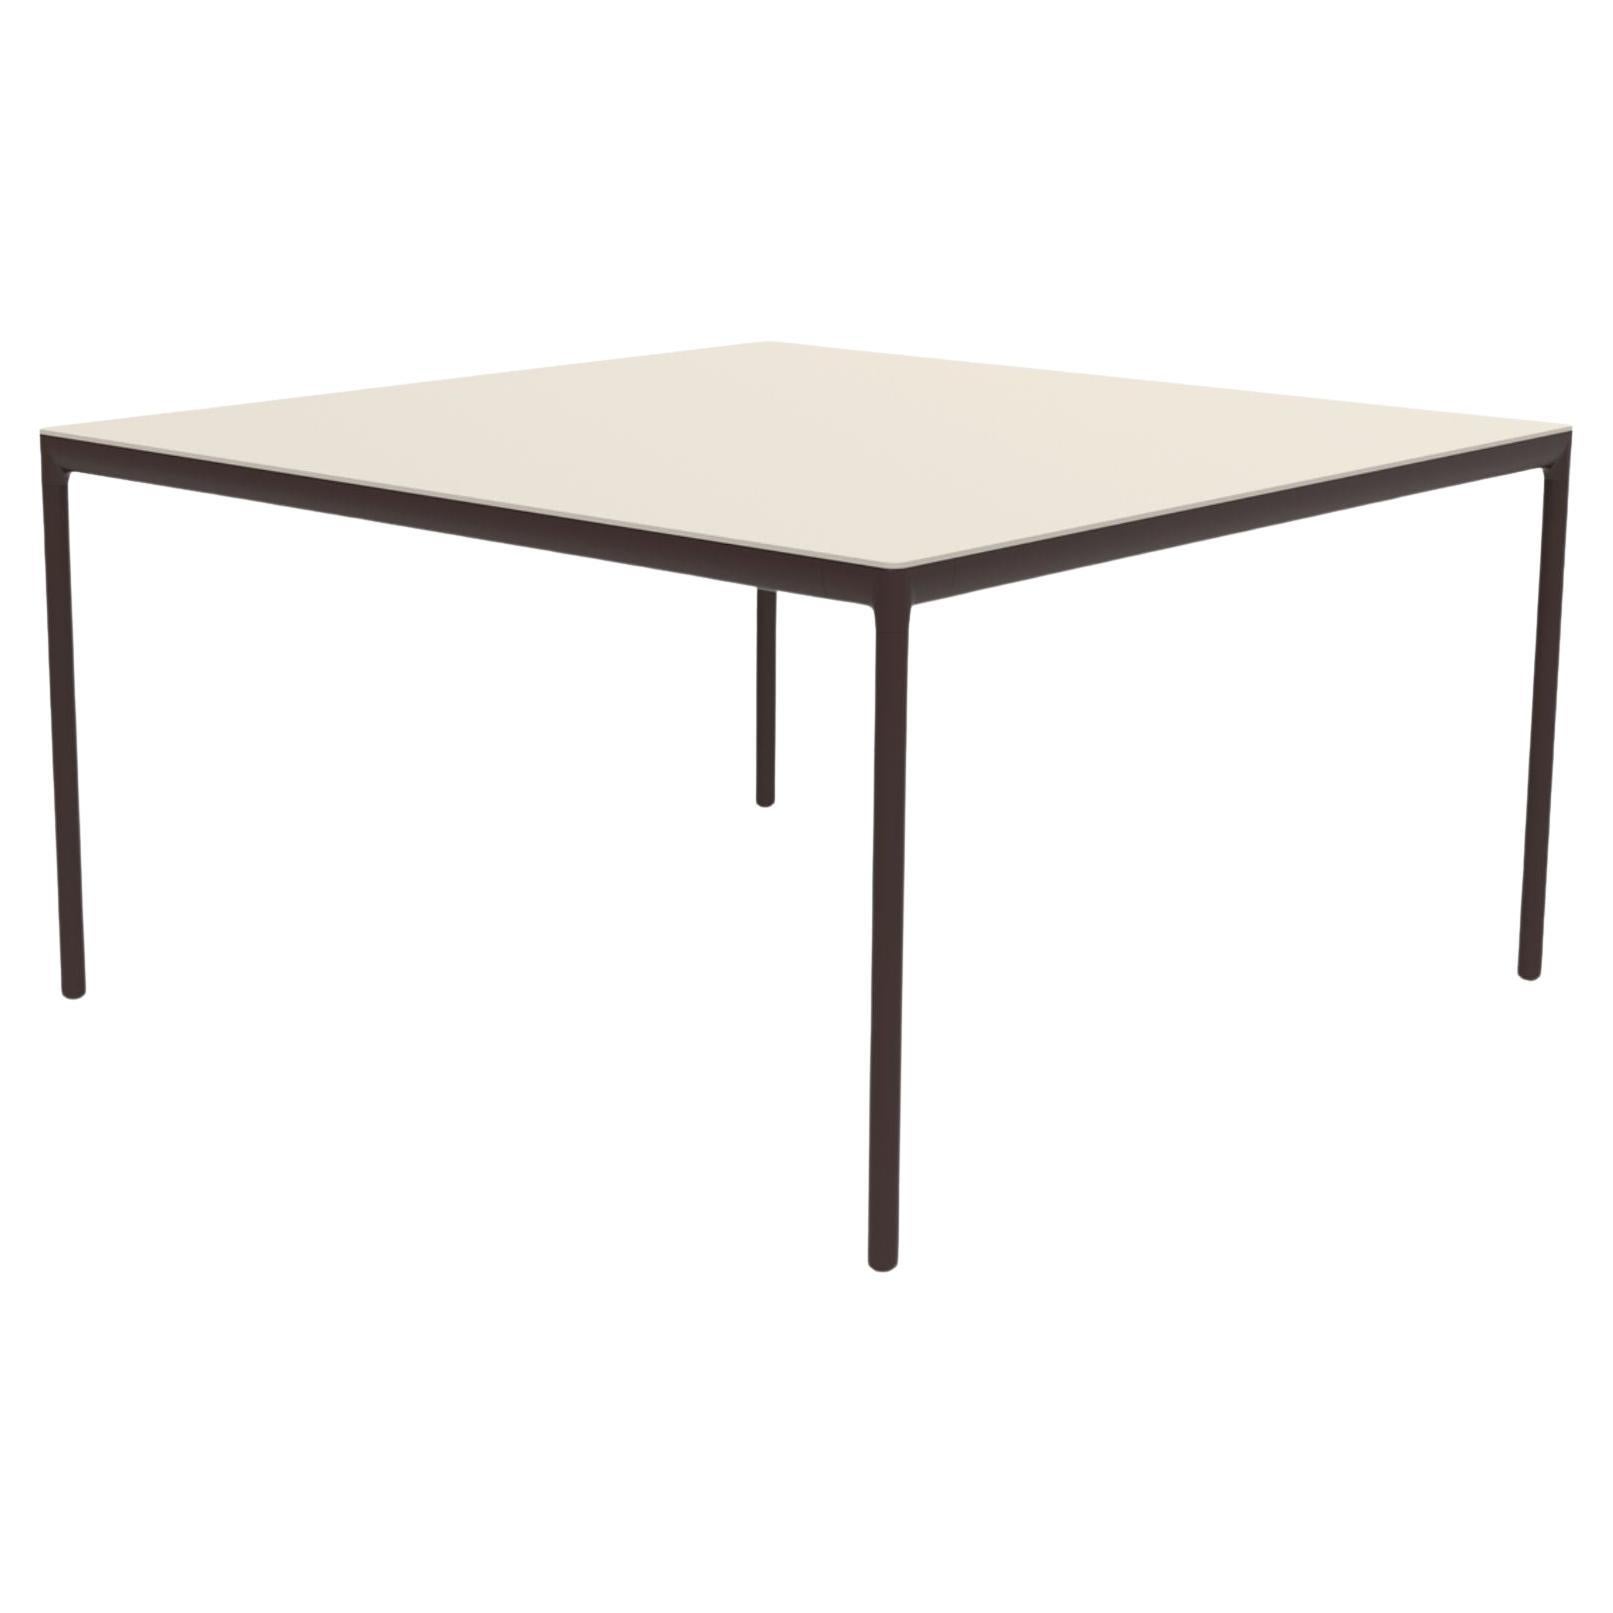 Ribbons Chocolate 138 Coffee Table by Mowee